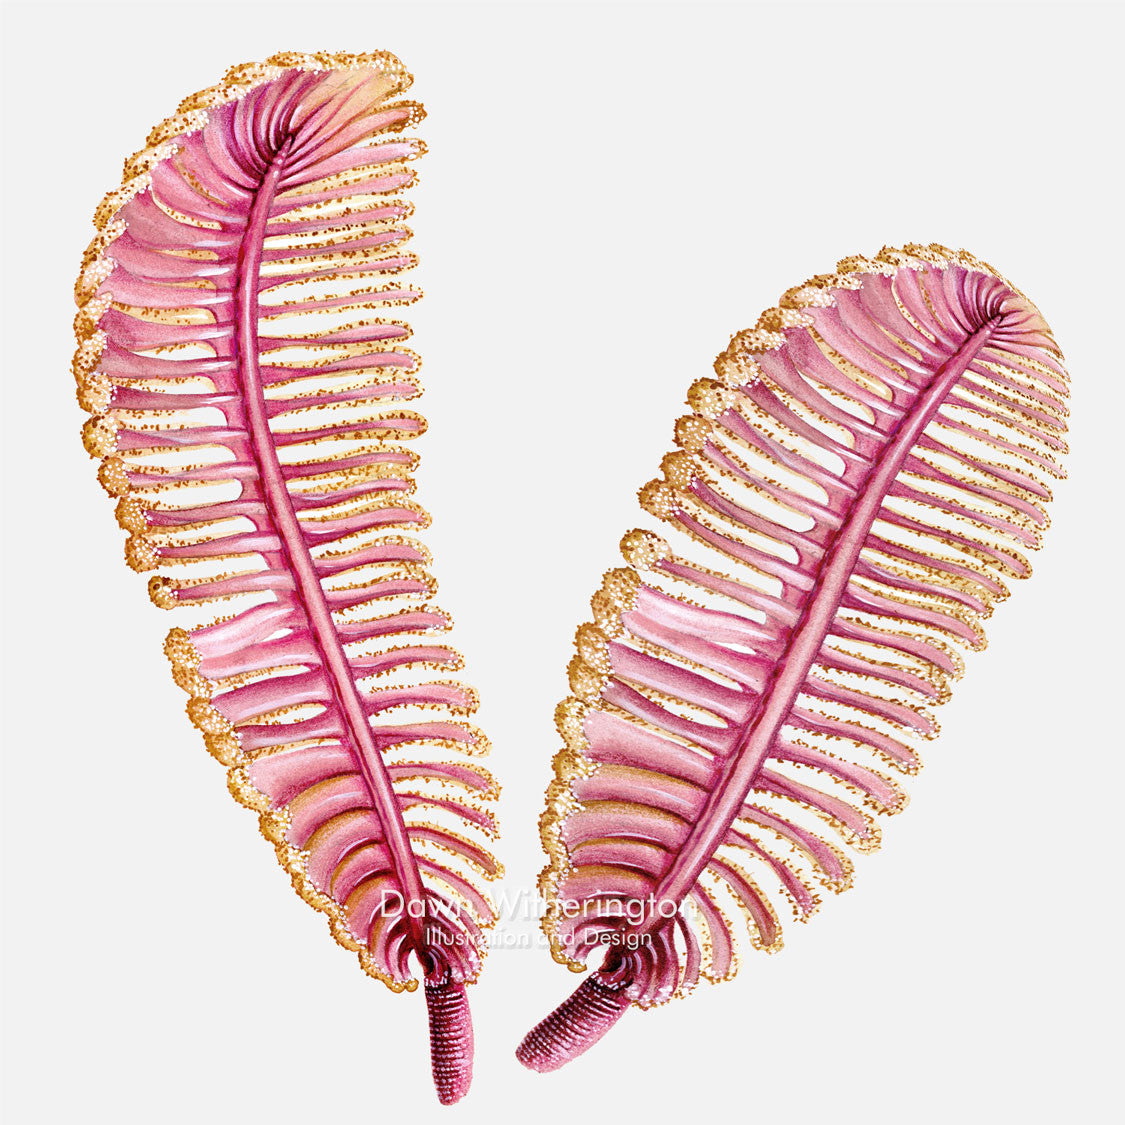 This beautiful illustration of sea pens is accurate in detail.